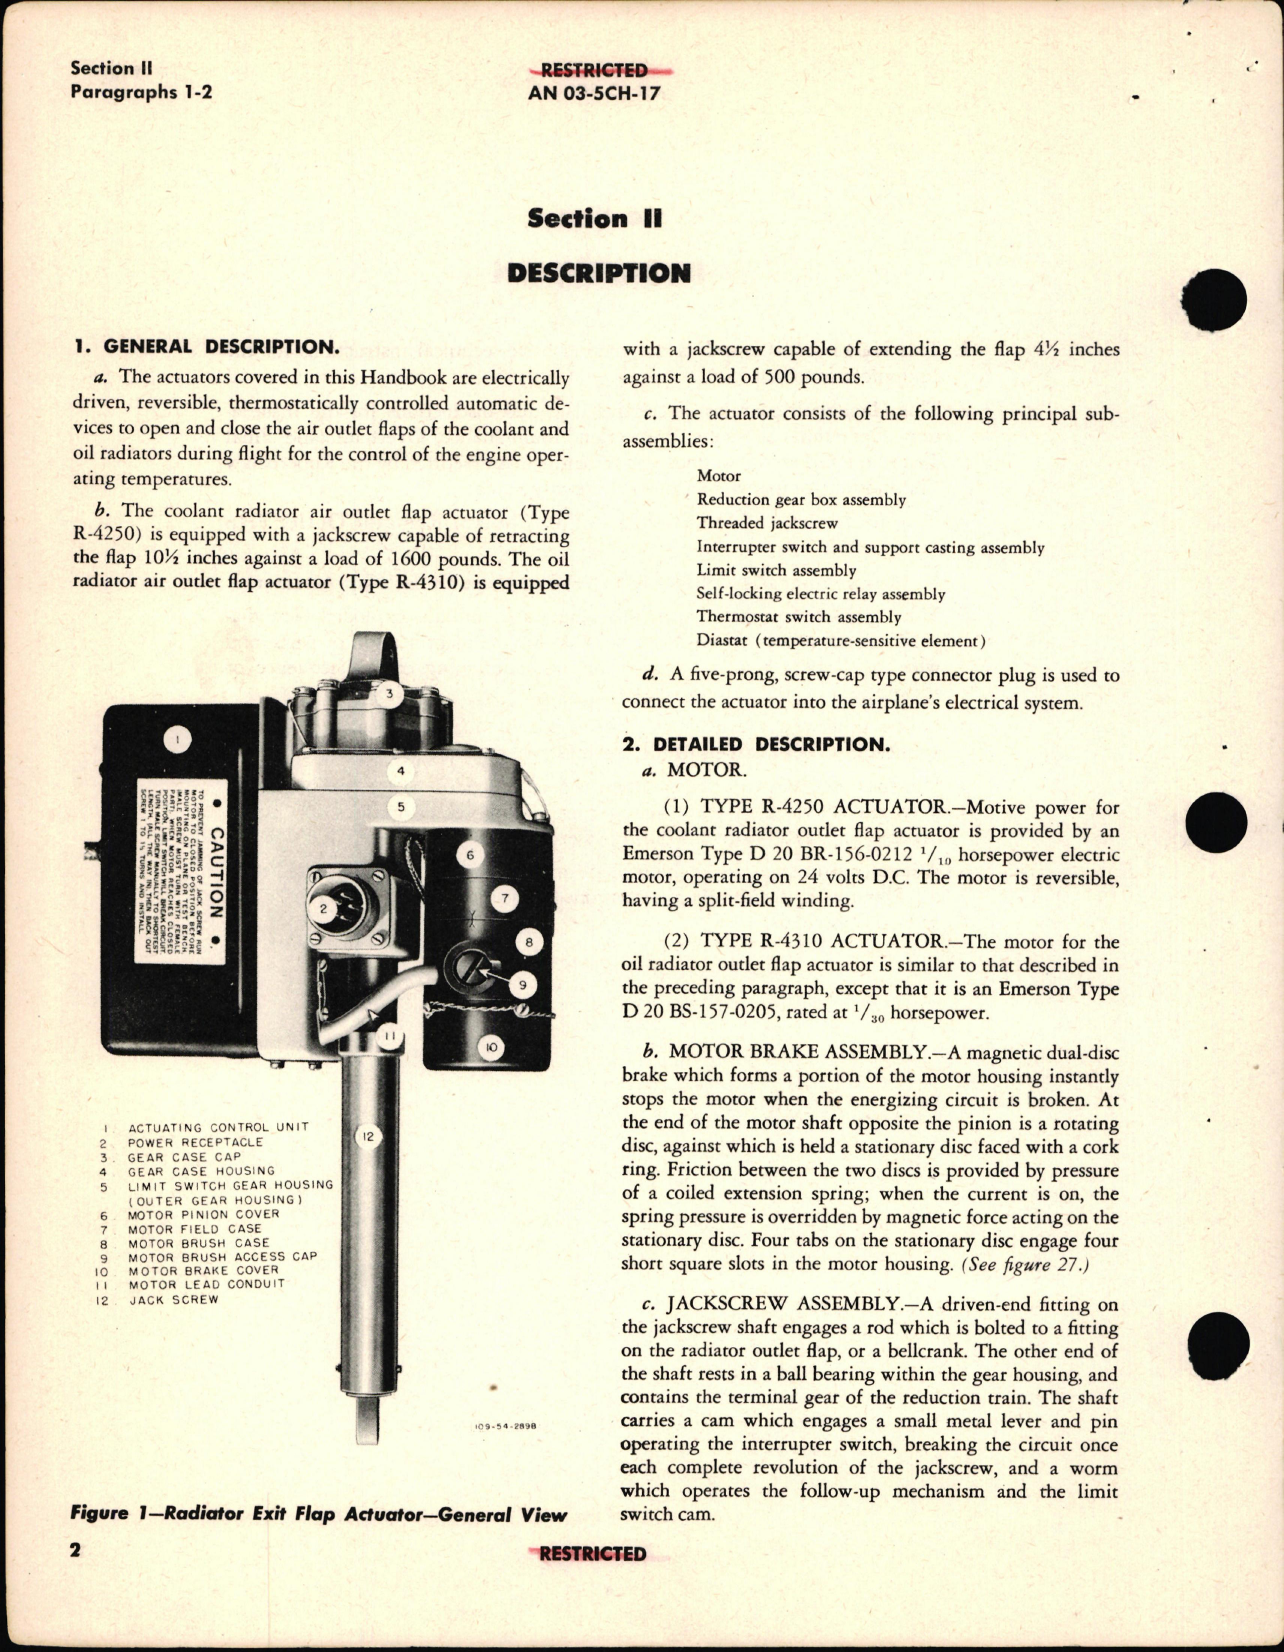 Sample page 6 from AirCorps Library document:  Operation, Service, & Overhaul Instructions with Parts Catalog for Thermostatic Actuators Models R-4250 and R-4310